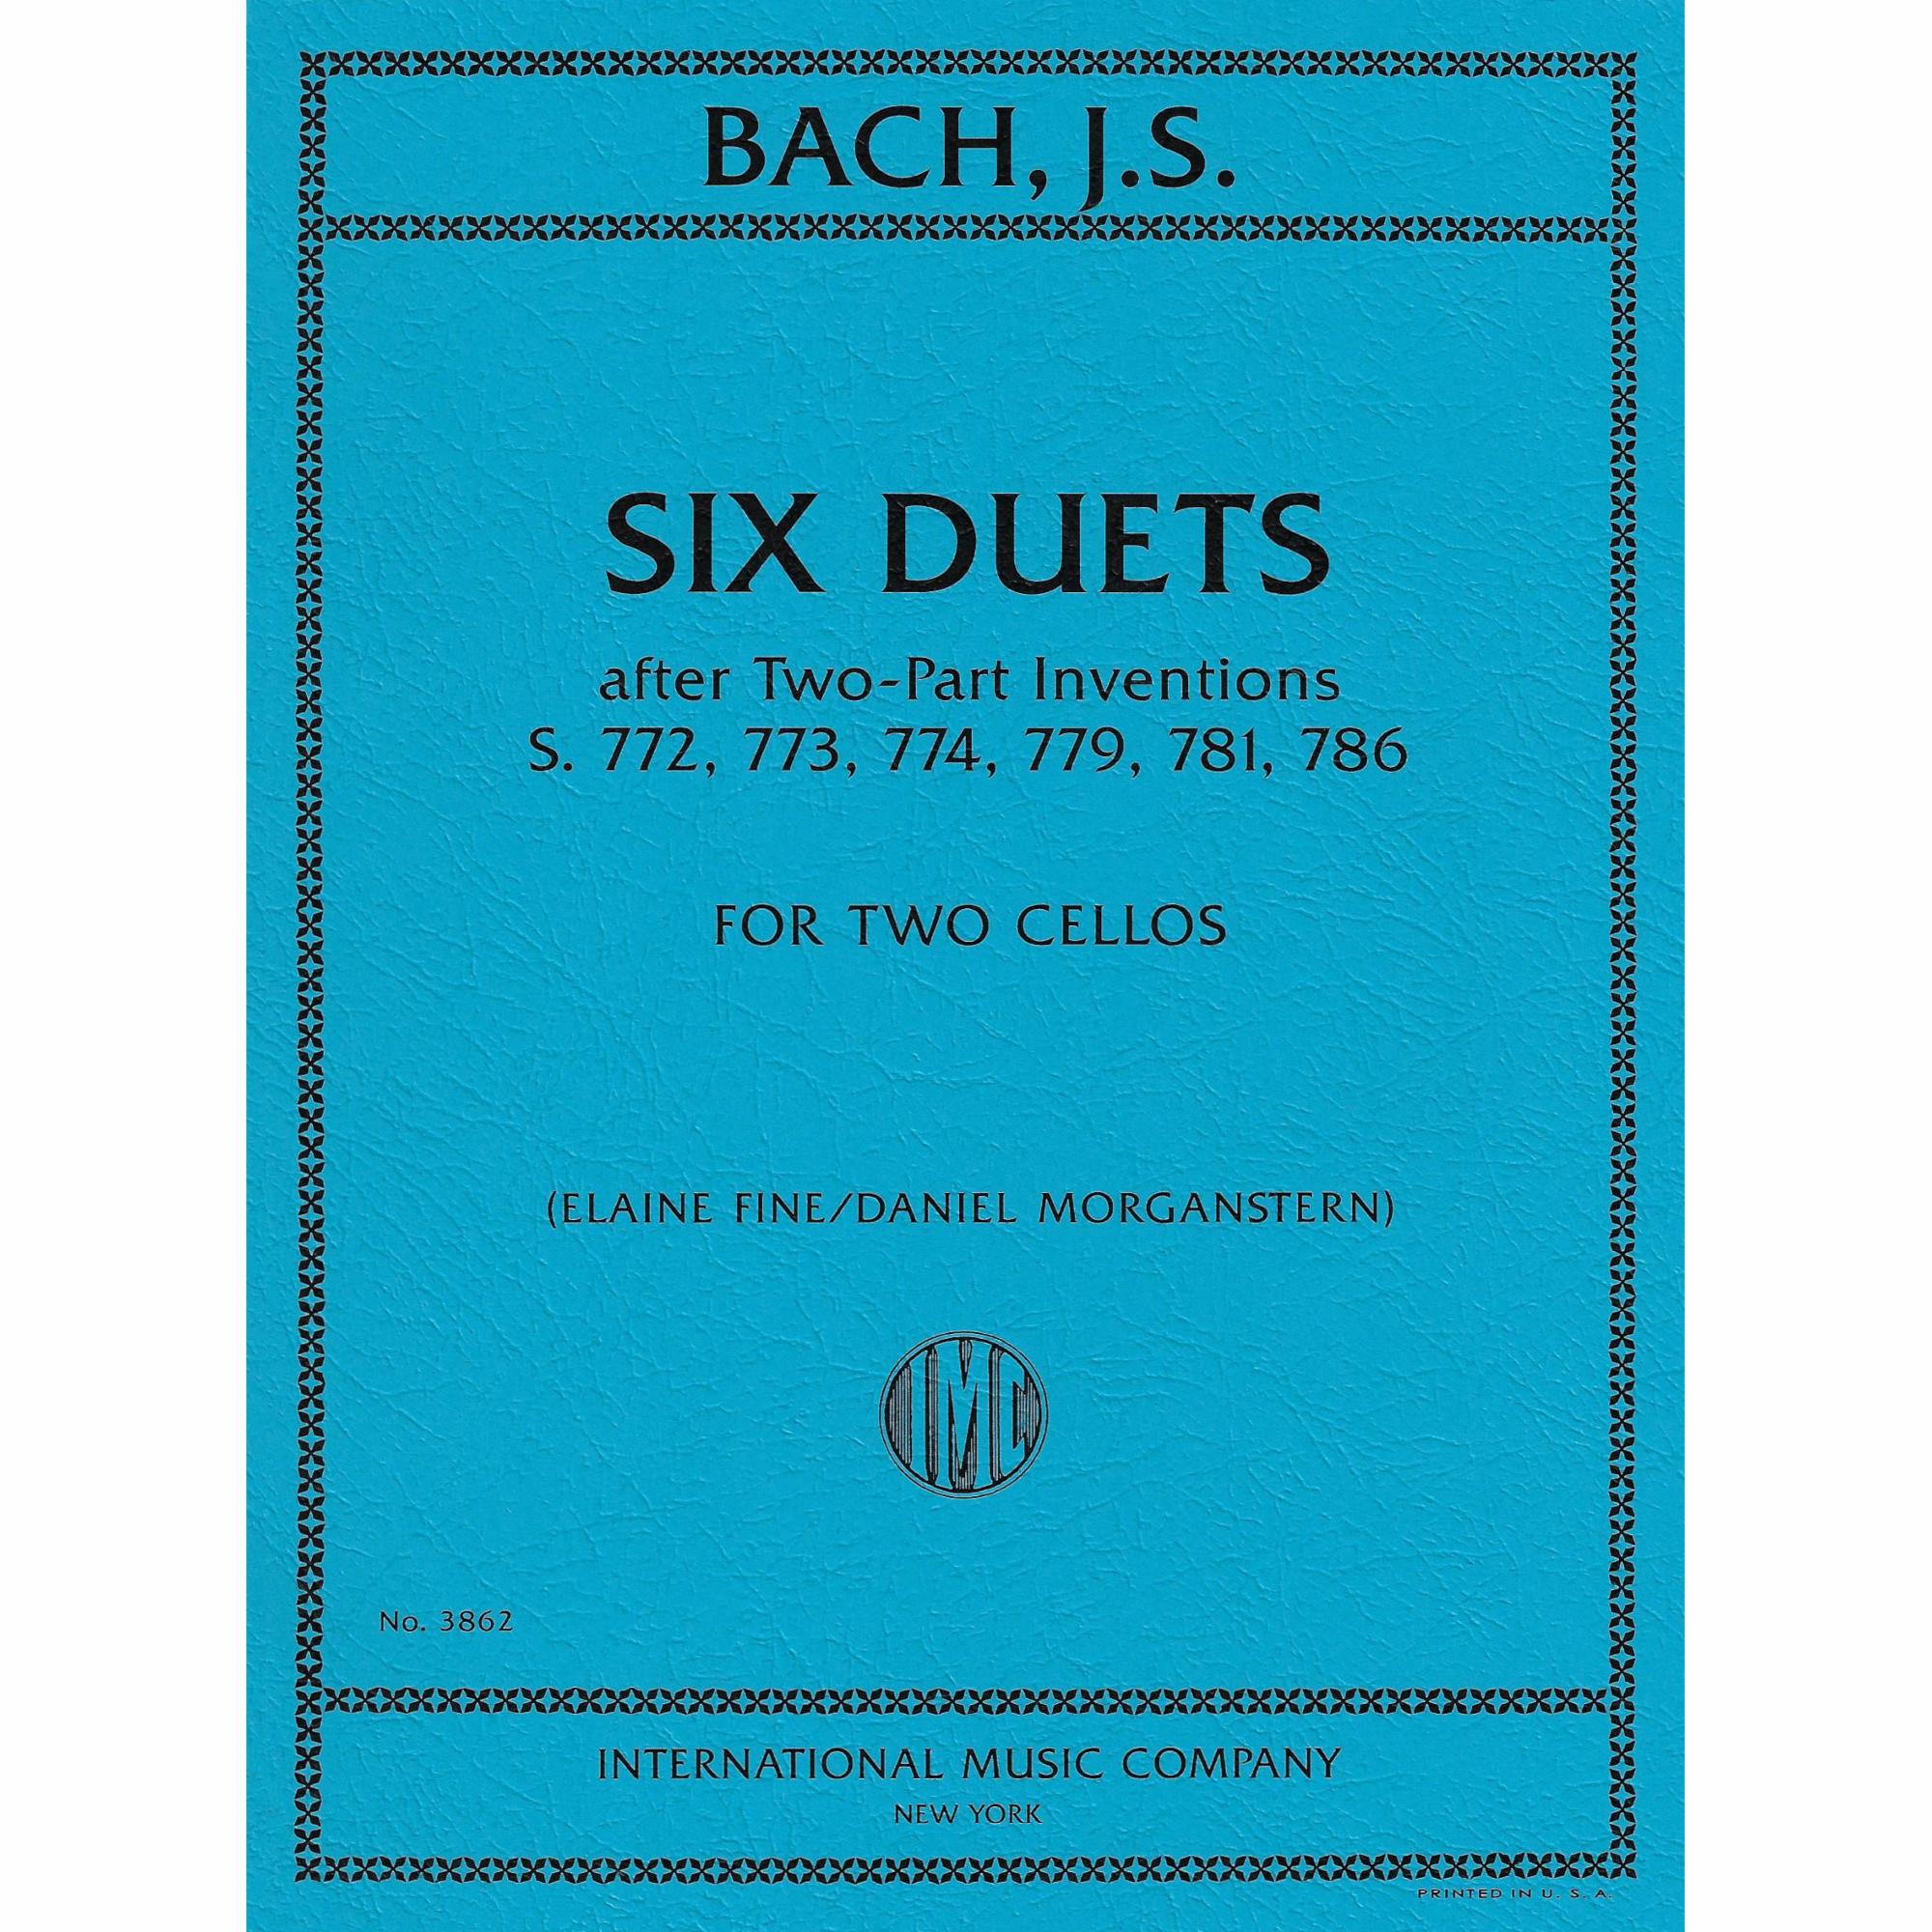 Bach -- Six Duets, after Two-Part Inventions for Two Cellos